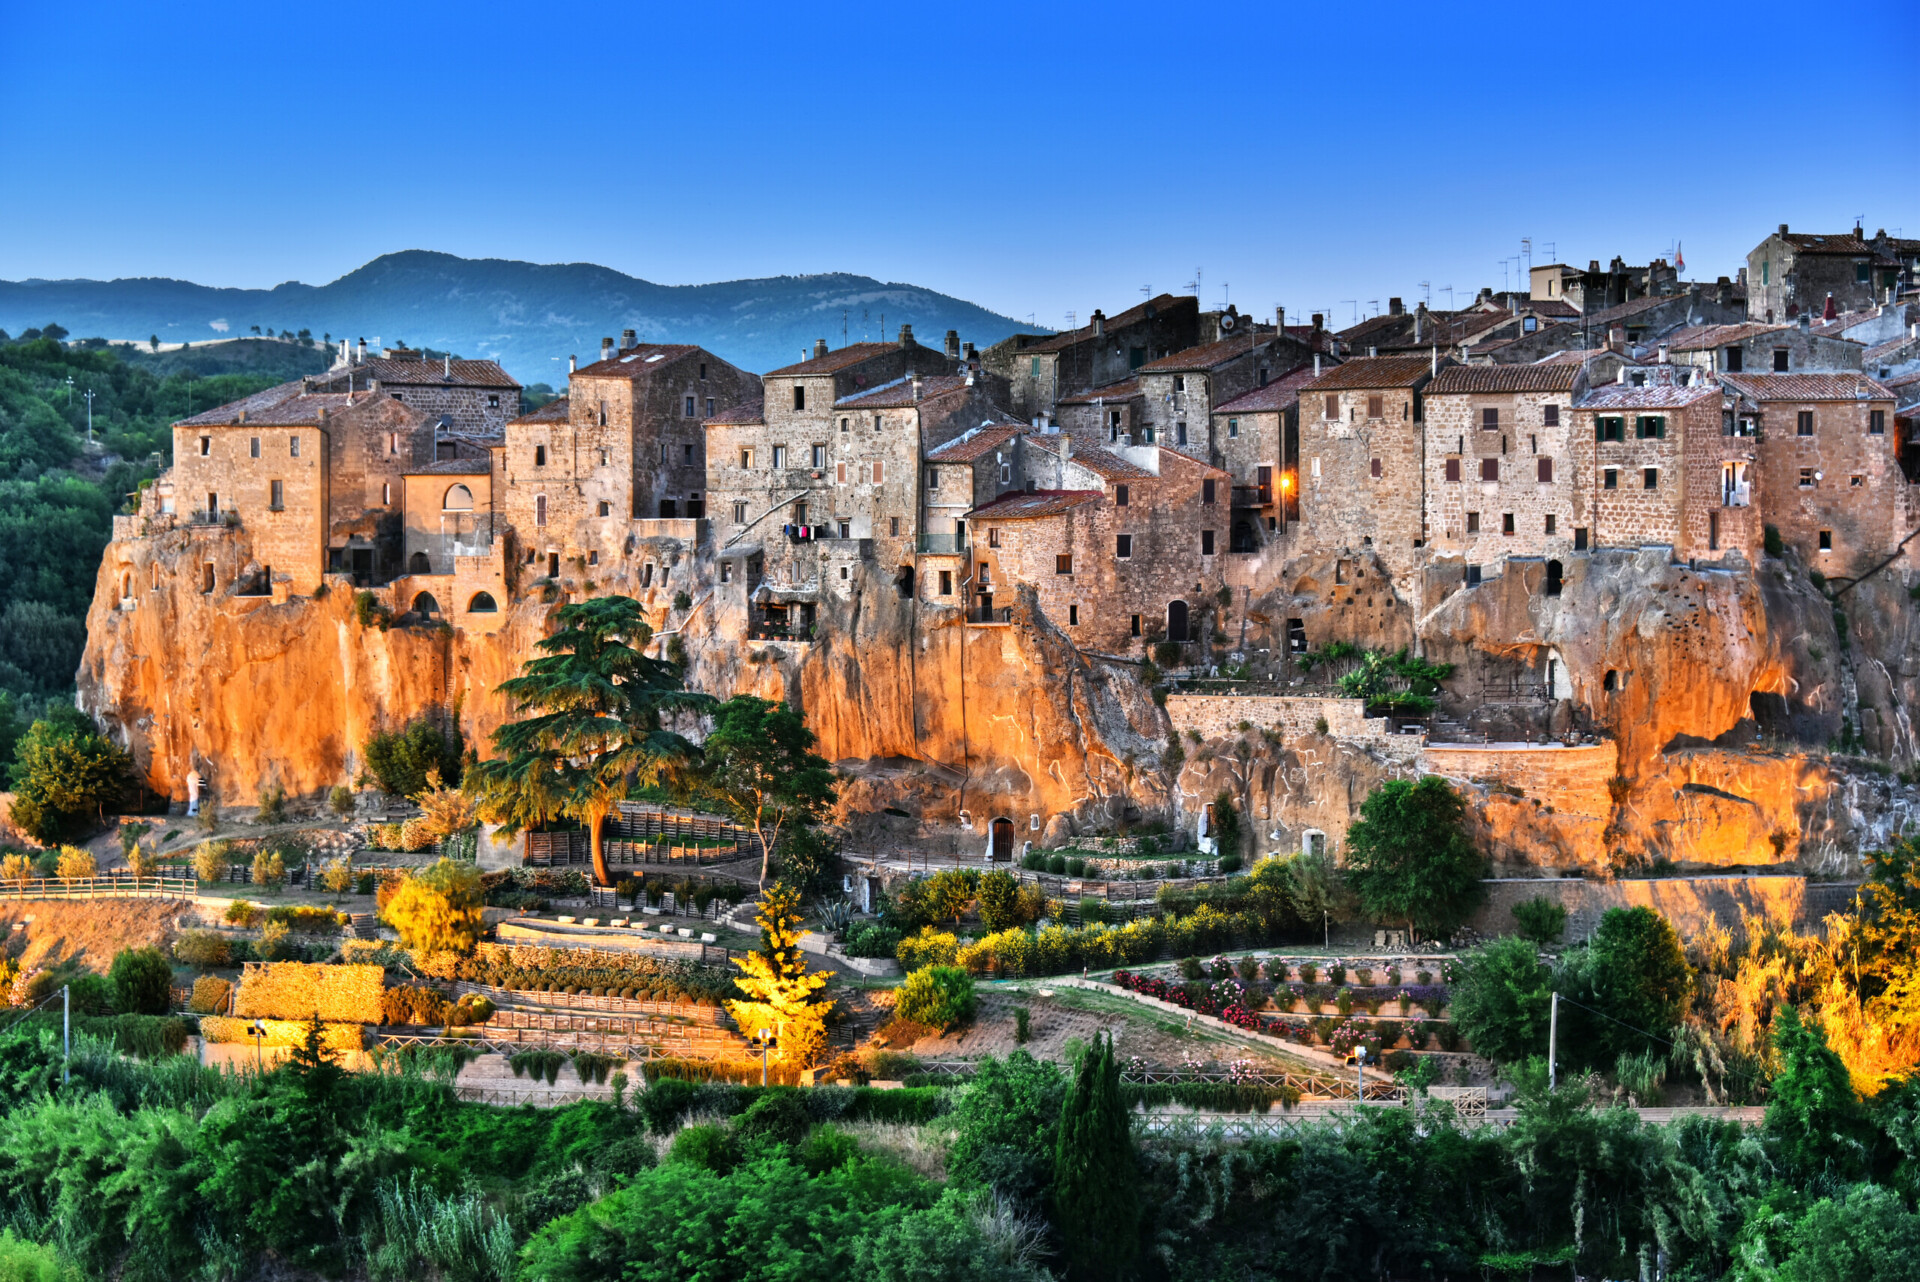 City of Pitigliano in Tuscany, Italy after sunset.